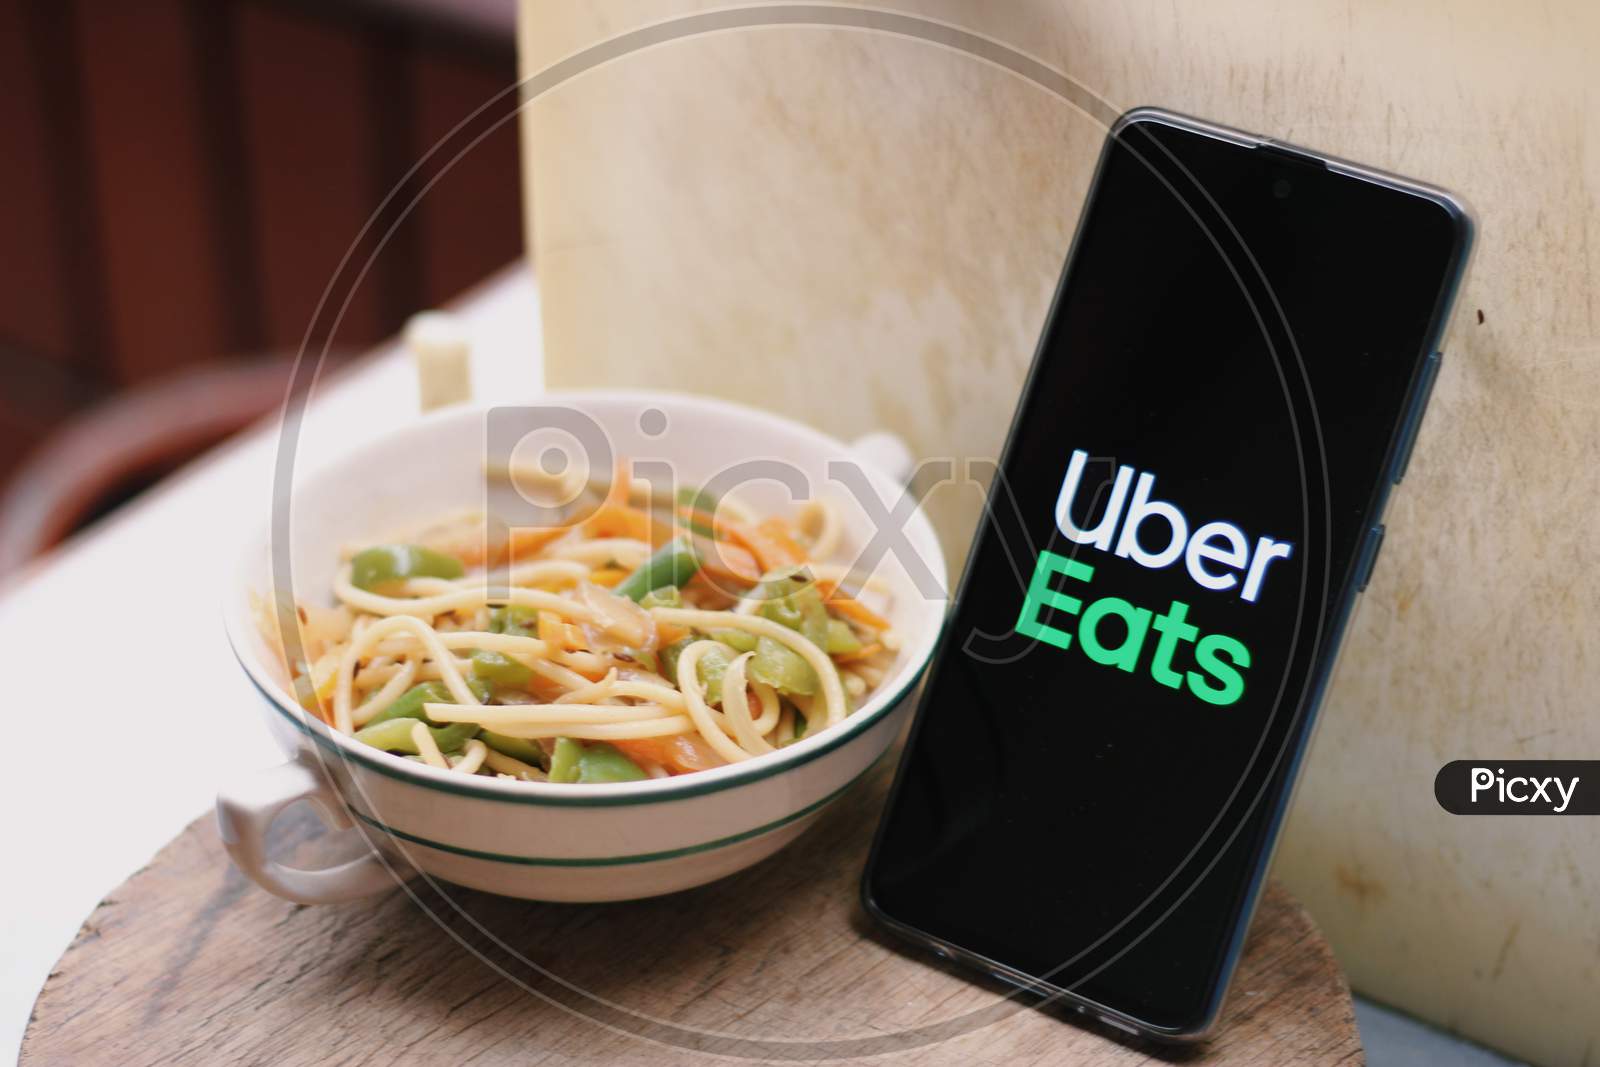 Uber eats Food delivery application icon on smartphone